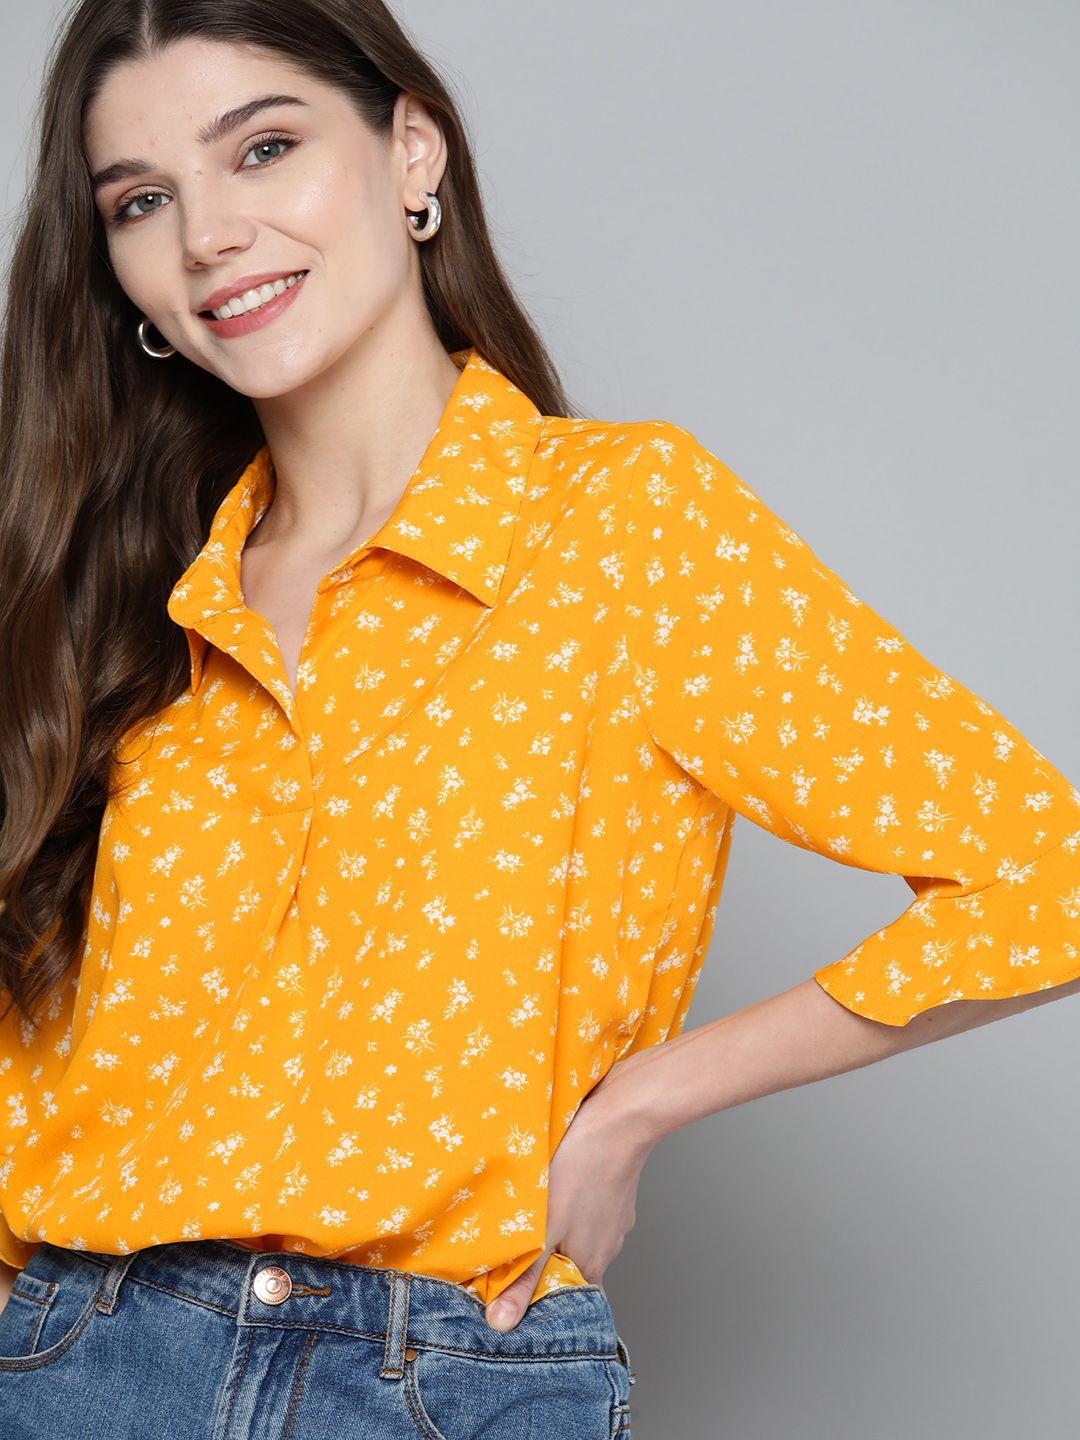 mast & harbour mustard yellow & white floral printed bell sleeves top